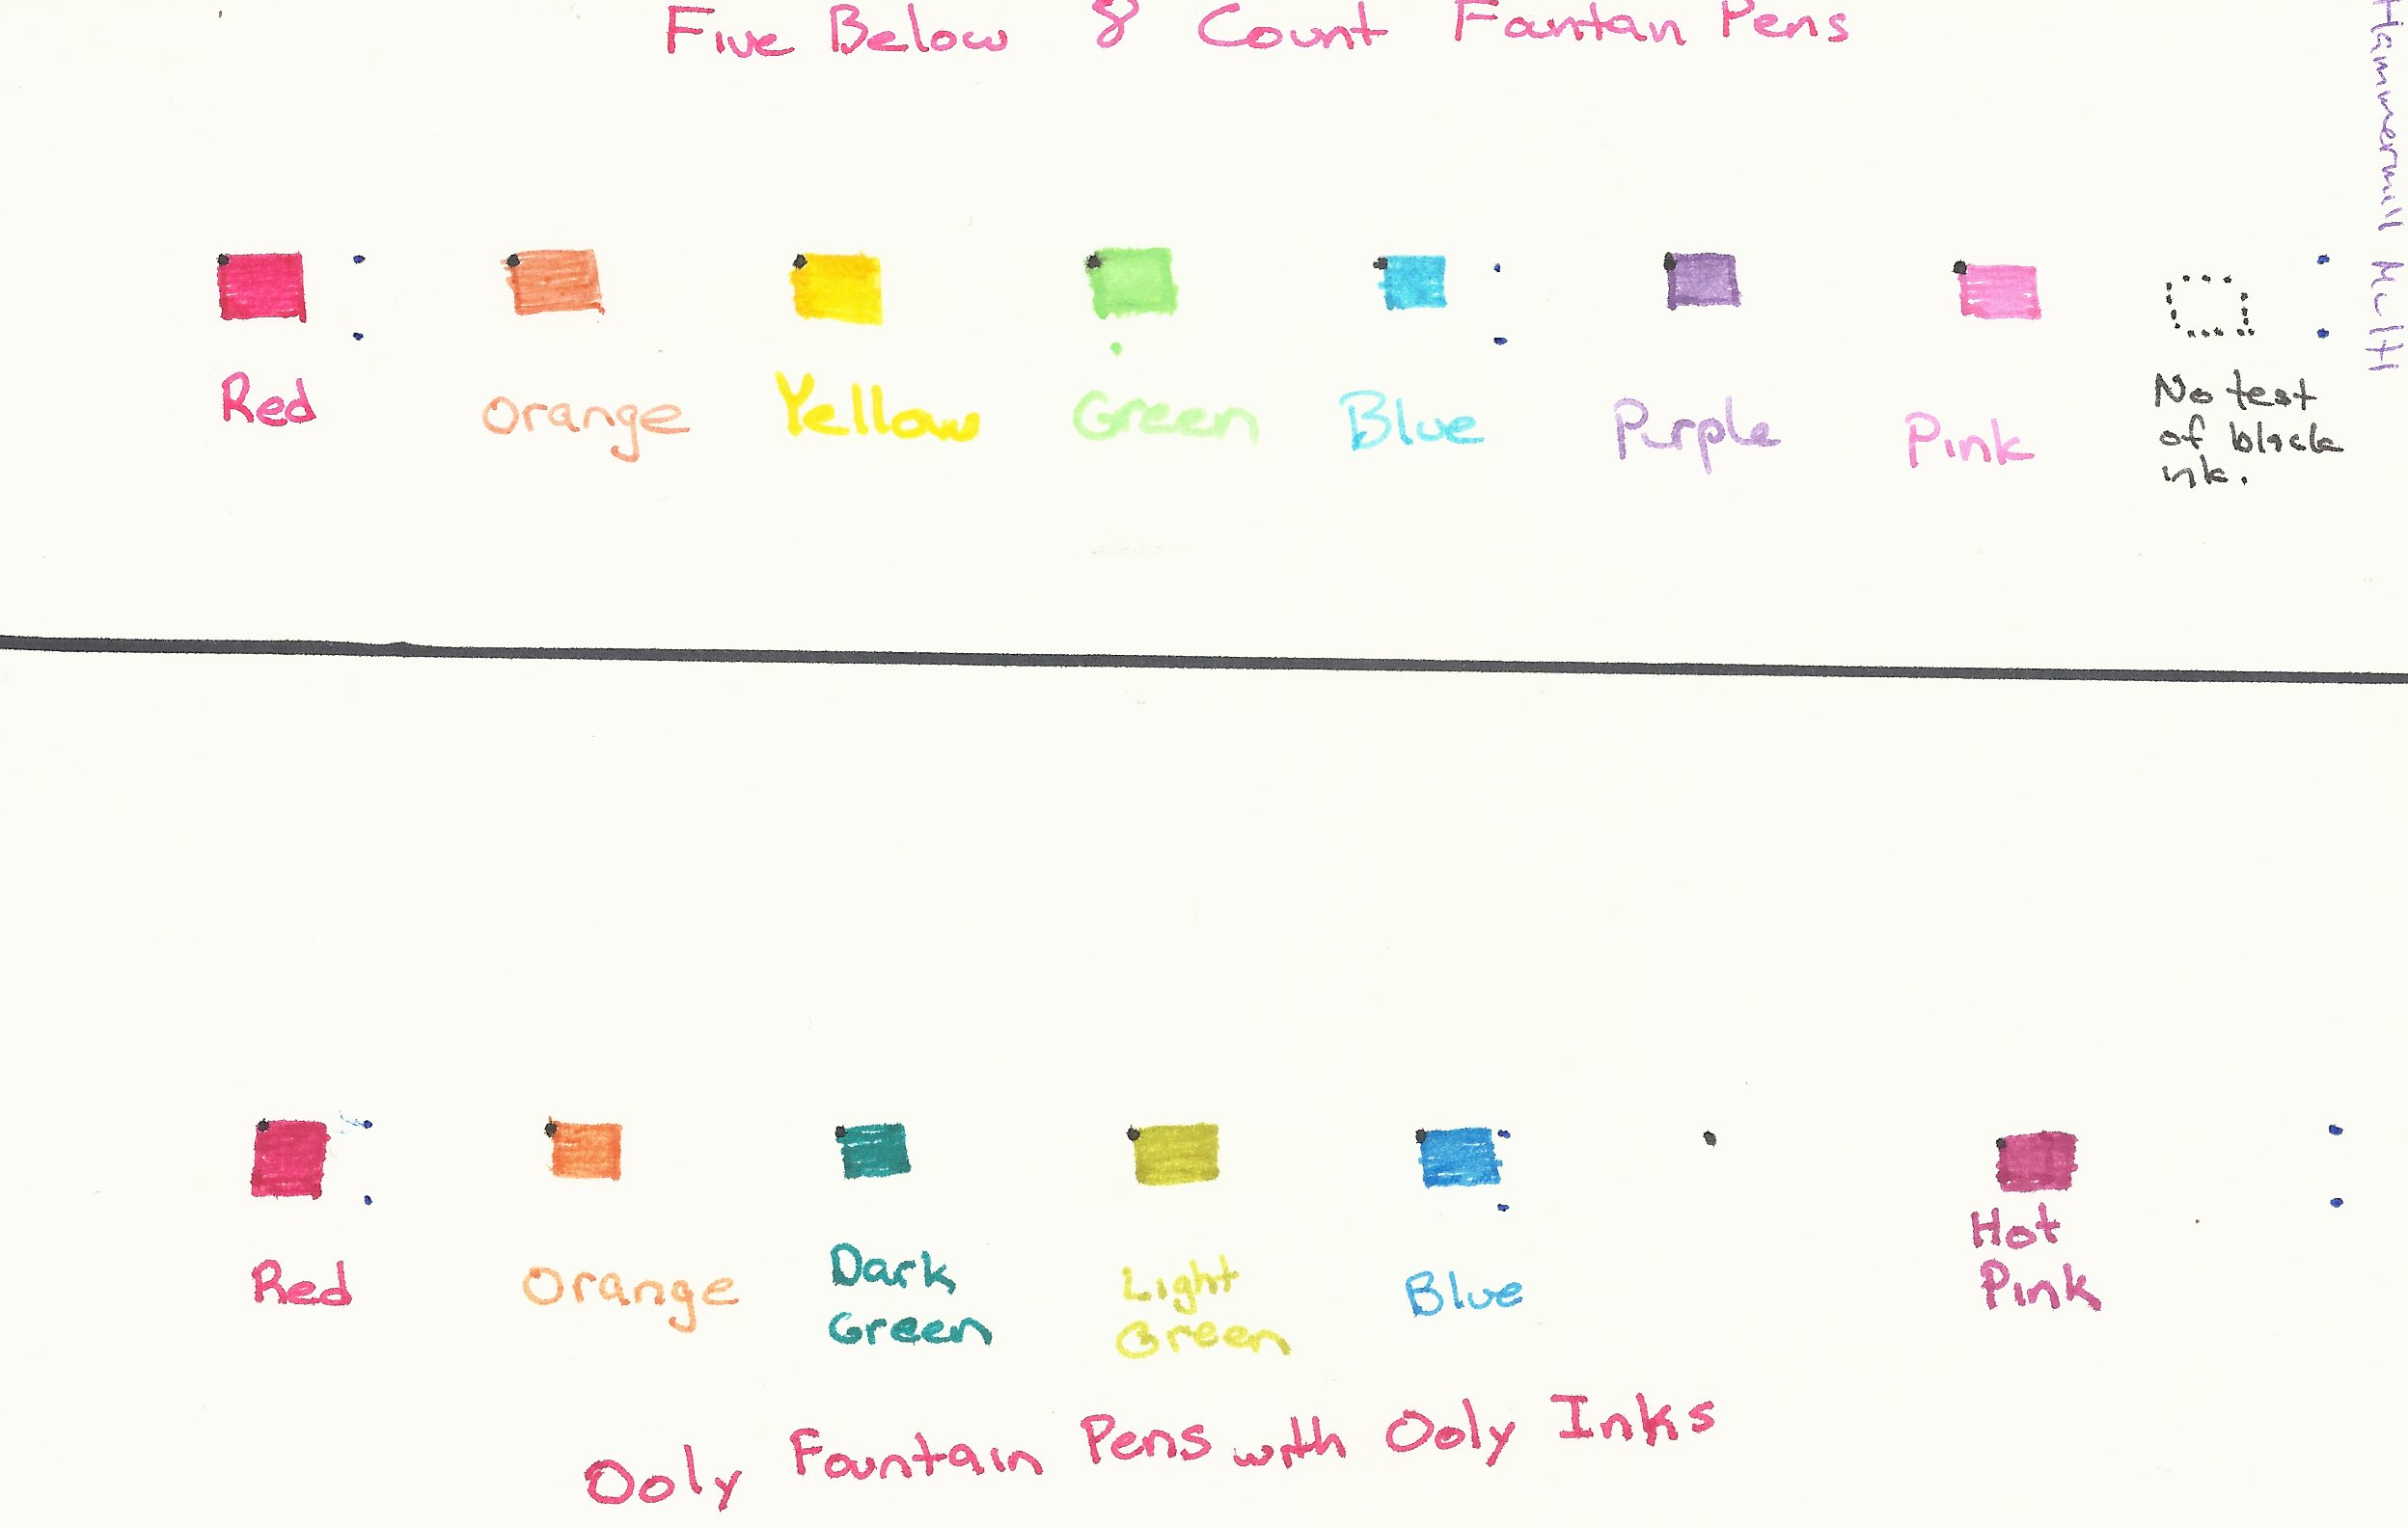 Five Below's “8 Count Fountain Pens” Review